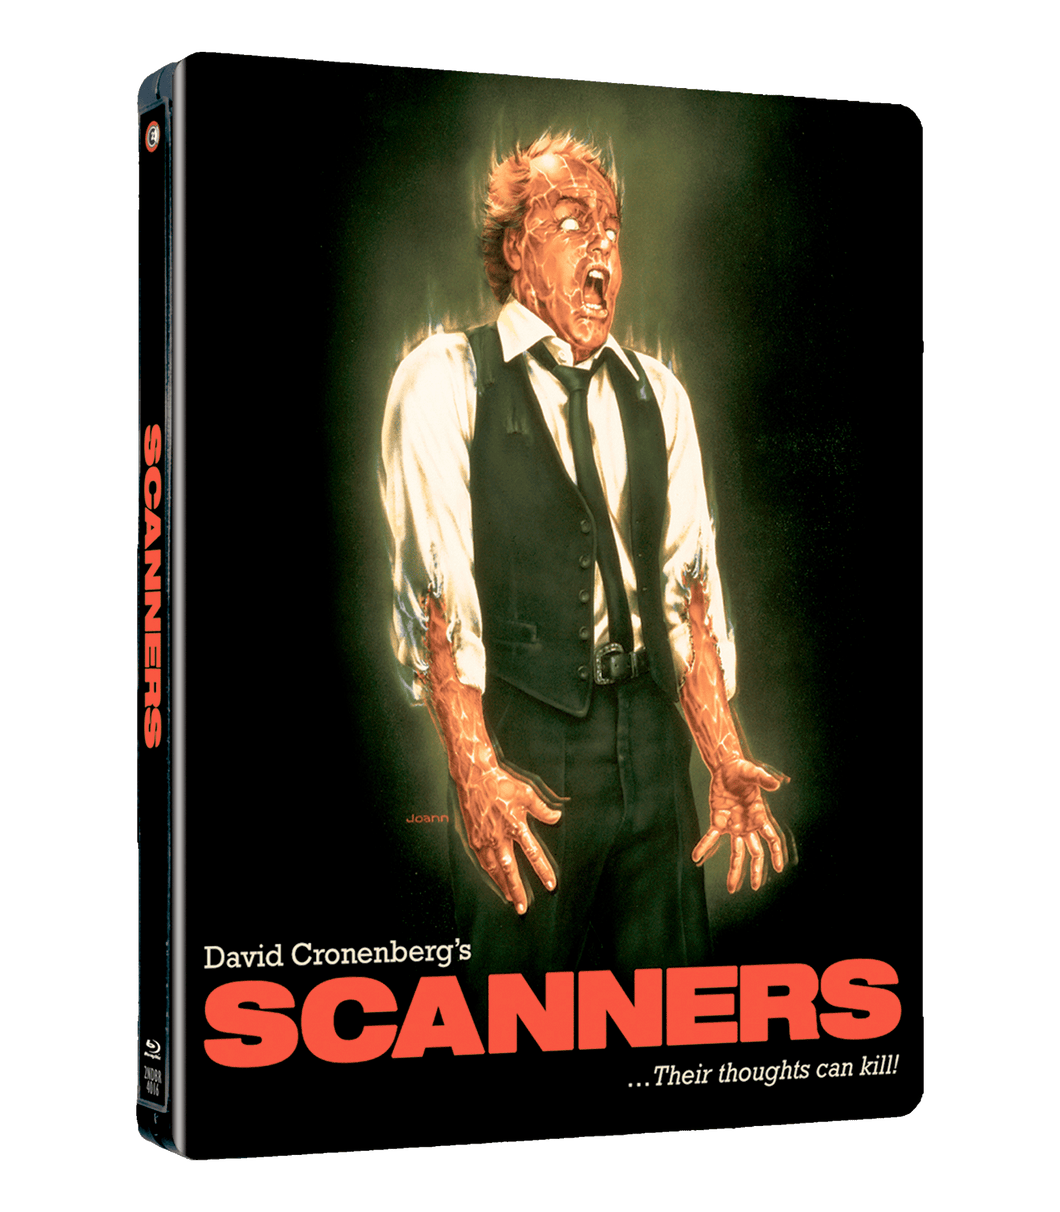 Scanners Steelbook - OUT OF PRINT